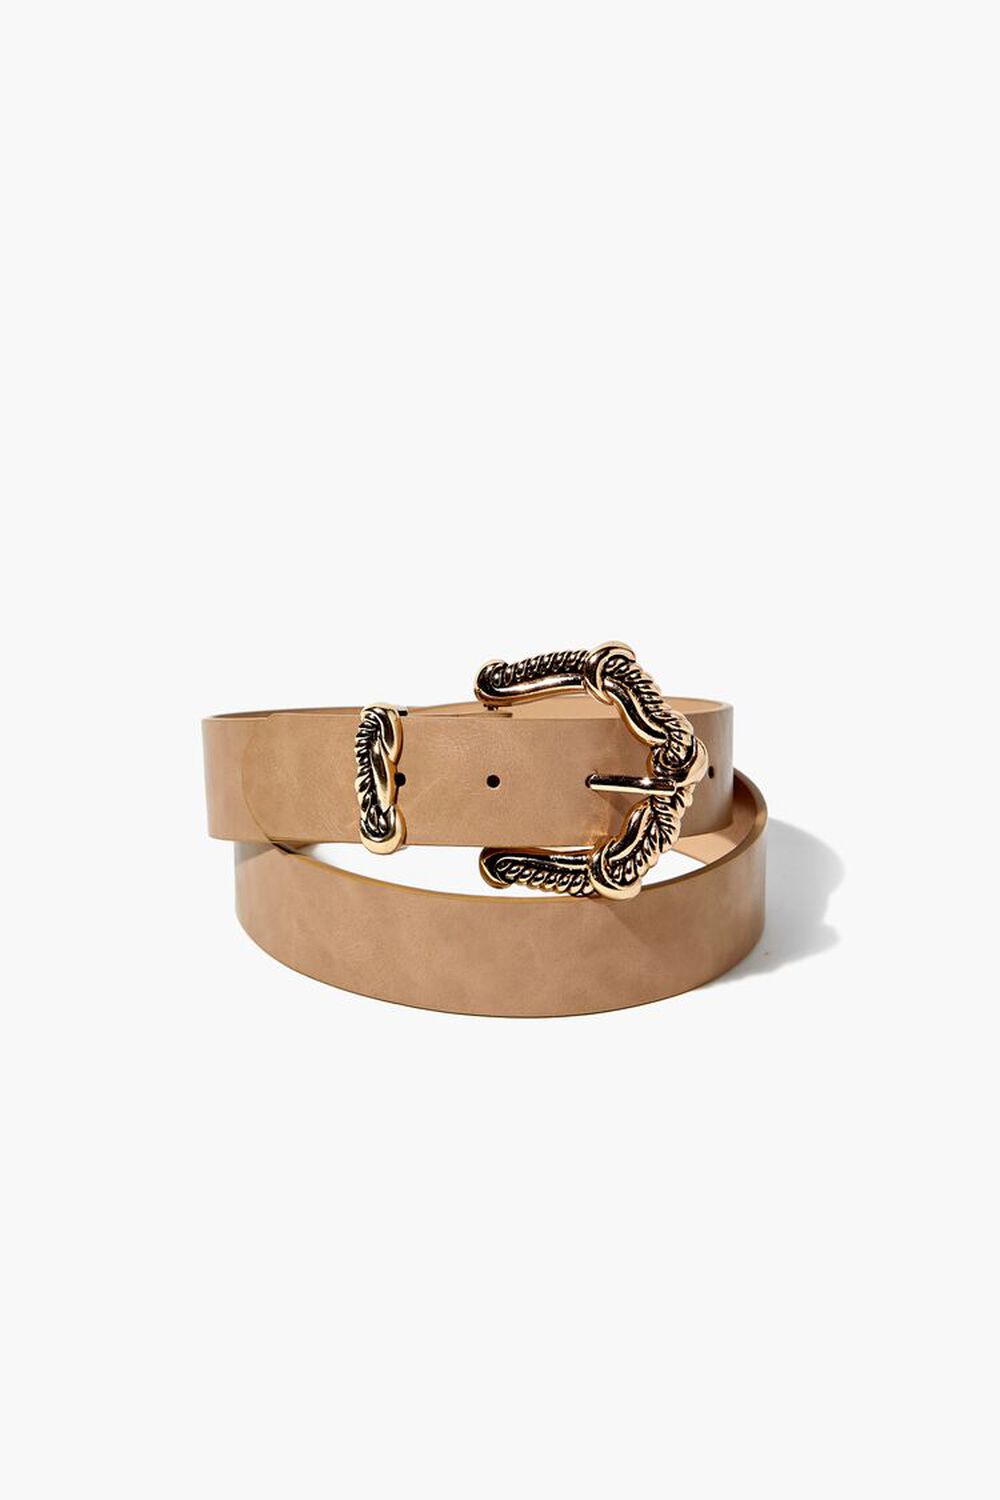 BEIGE/GOLD Faux Leather Twisted Buckle Belt, image 1